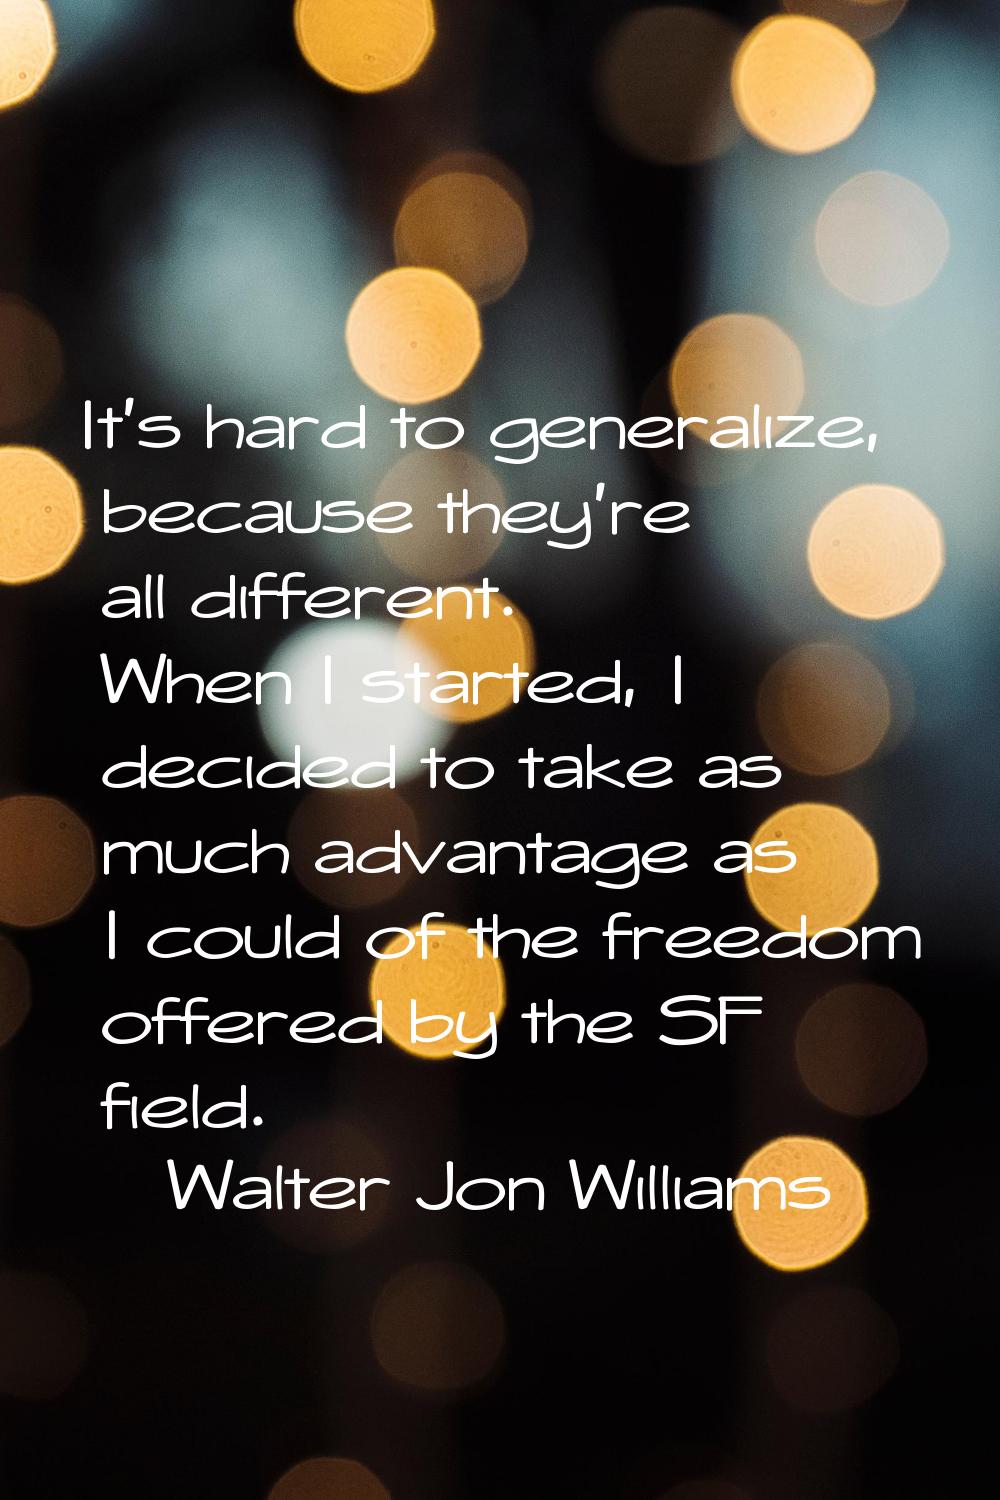 It's hard to generalize, because they're all different. When I started, I decided to take as much a